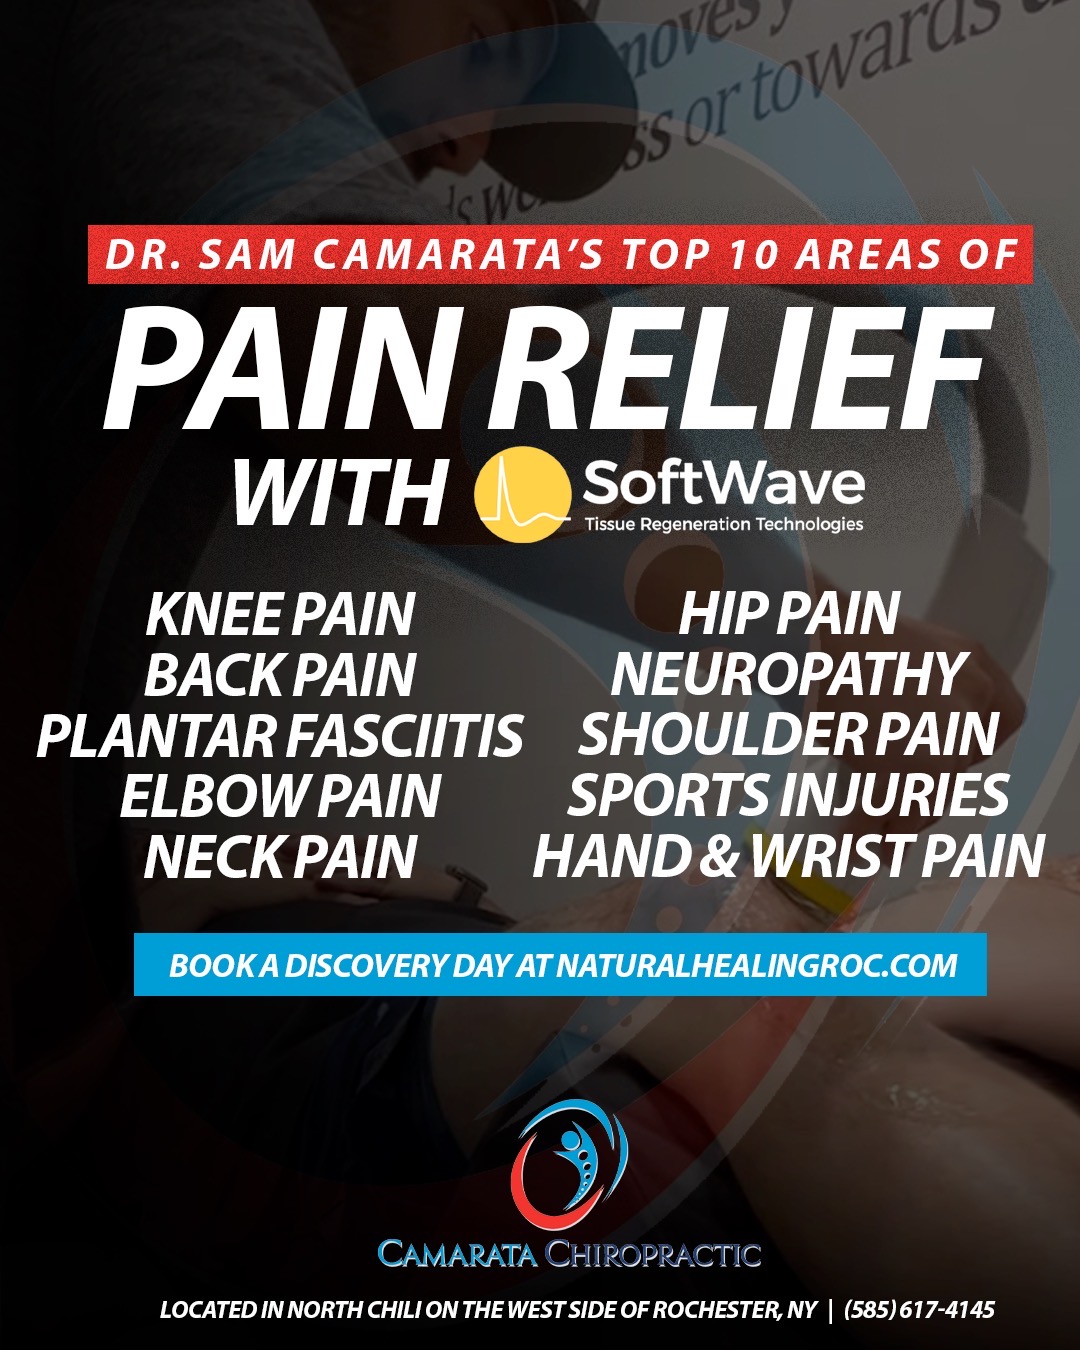 Unveiling Dr. Sam Camarata's Top 10 Pain Relief Areas with SoftWave Technology